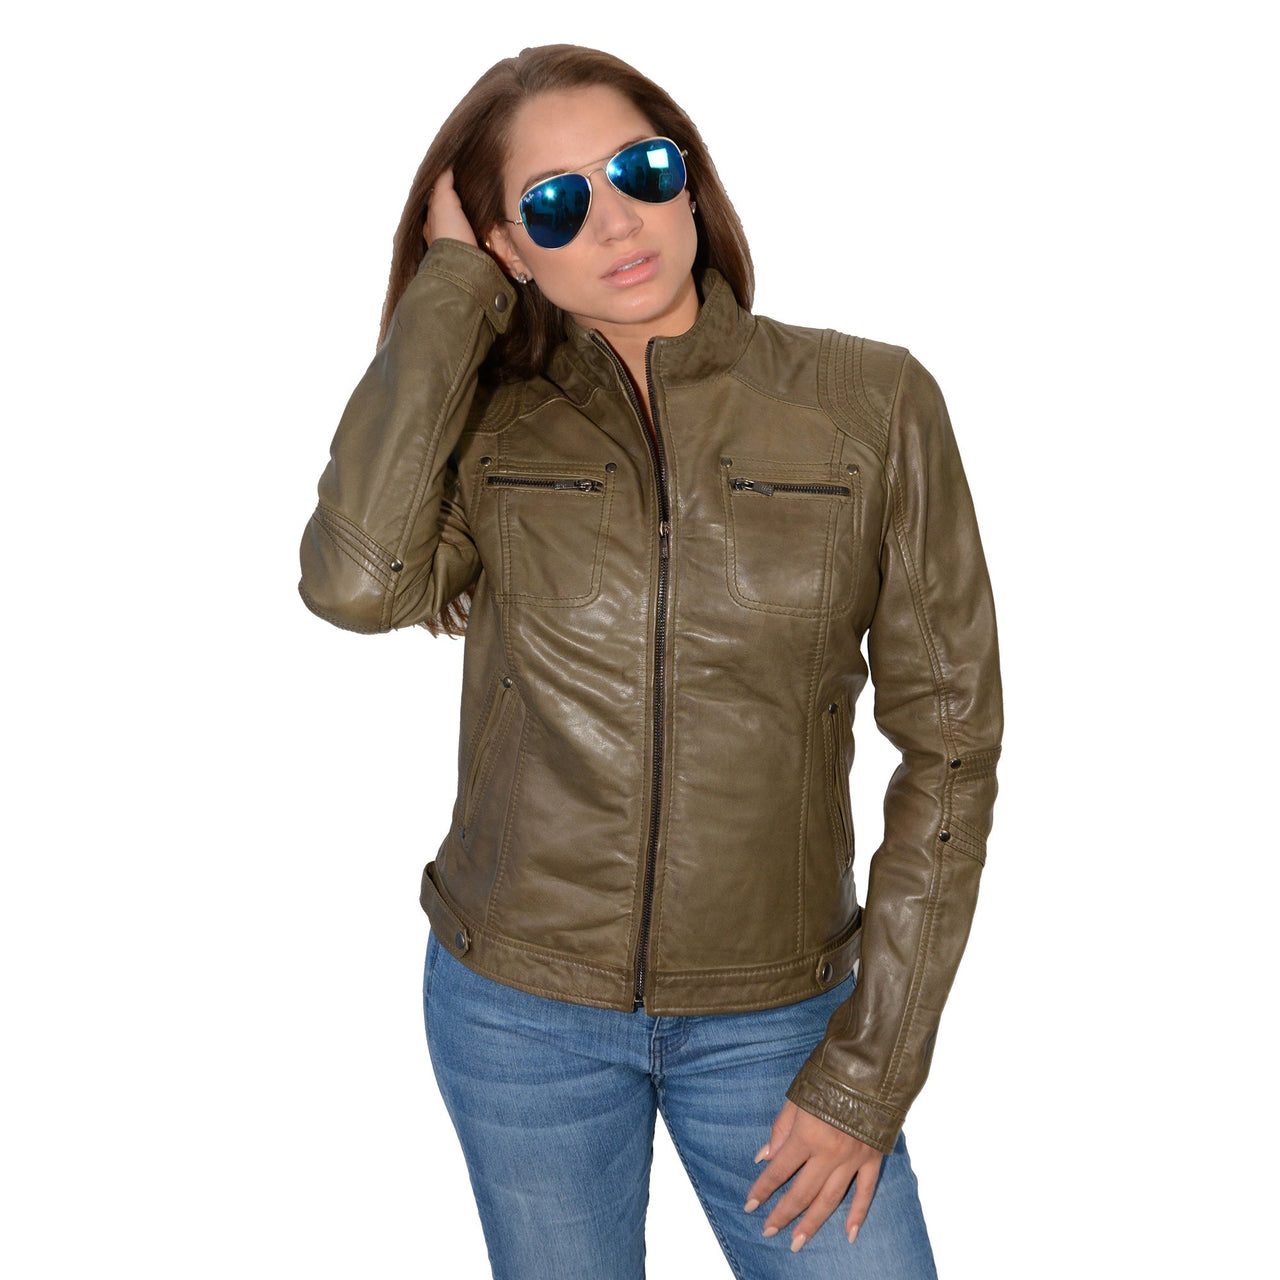 Ladies stand up collar racer jacket with rivet details - HighwayLeather